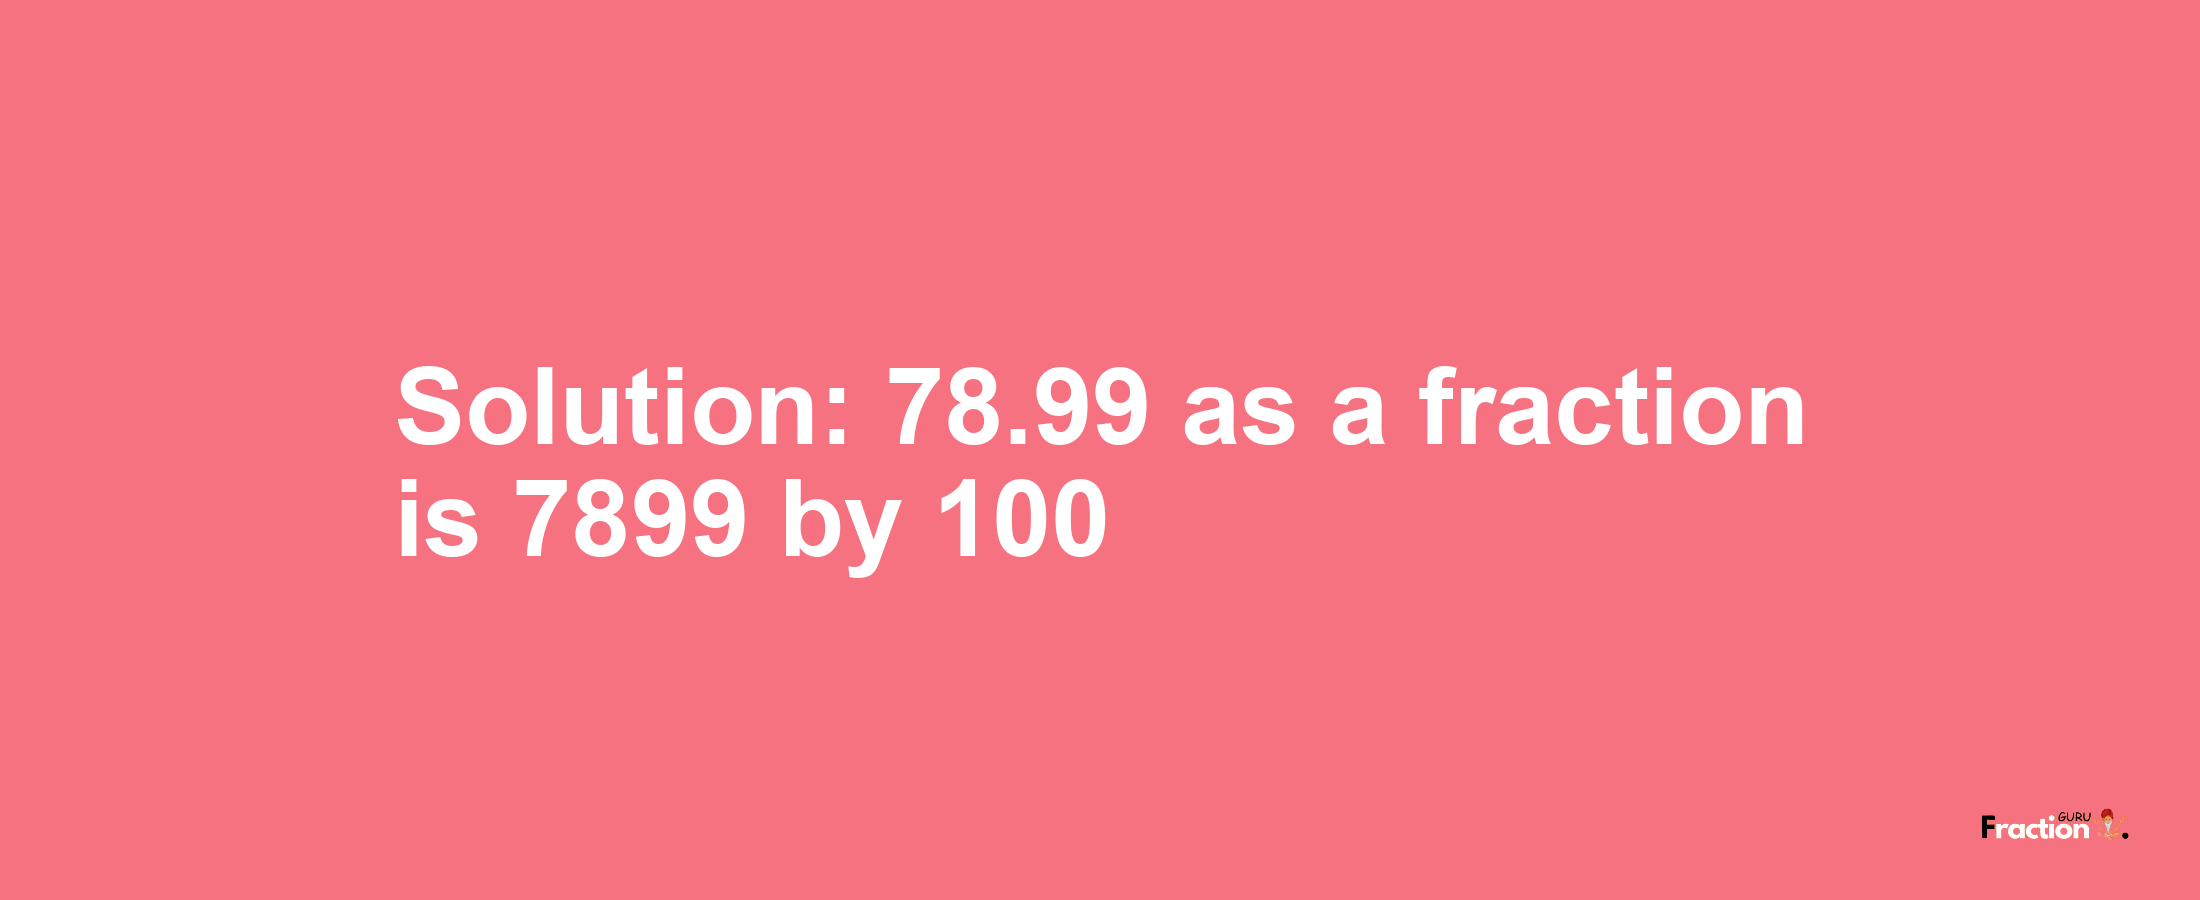 Solution:78.99 as a fraction is 7899/100